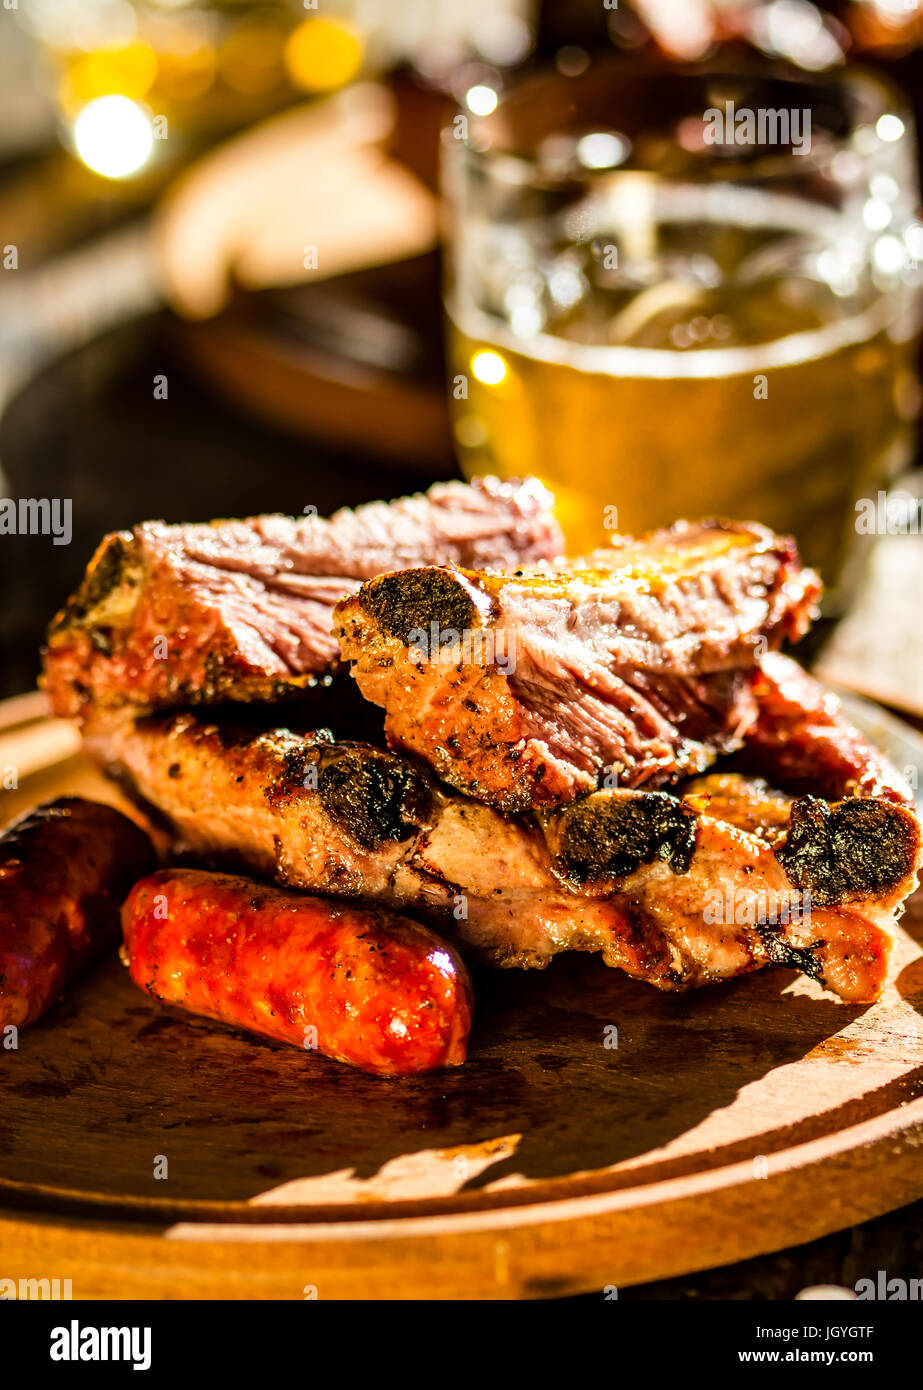 Barbecue pork ribs and sausages with beer on wooden board Stock Photo